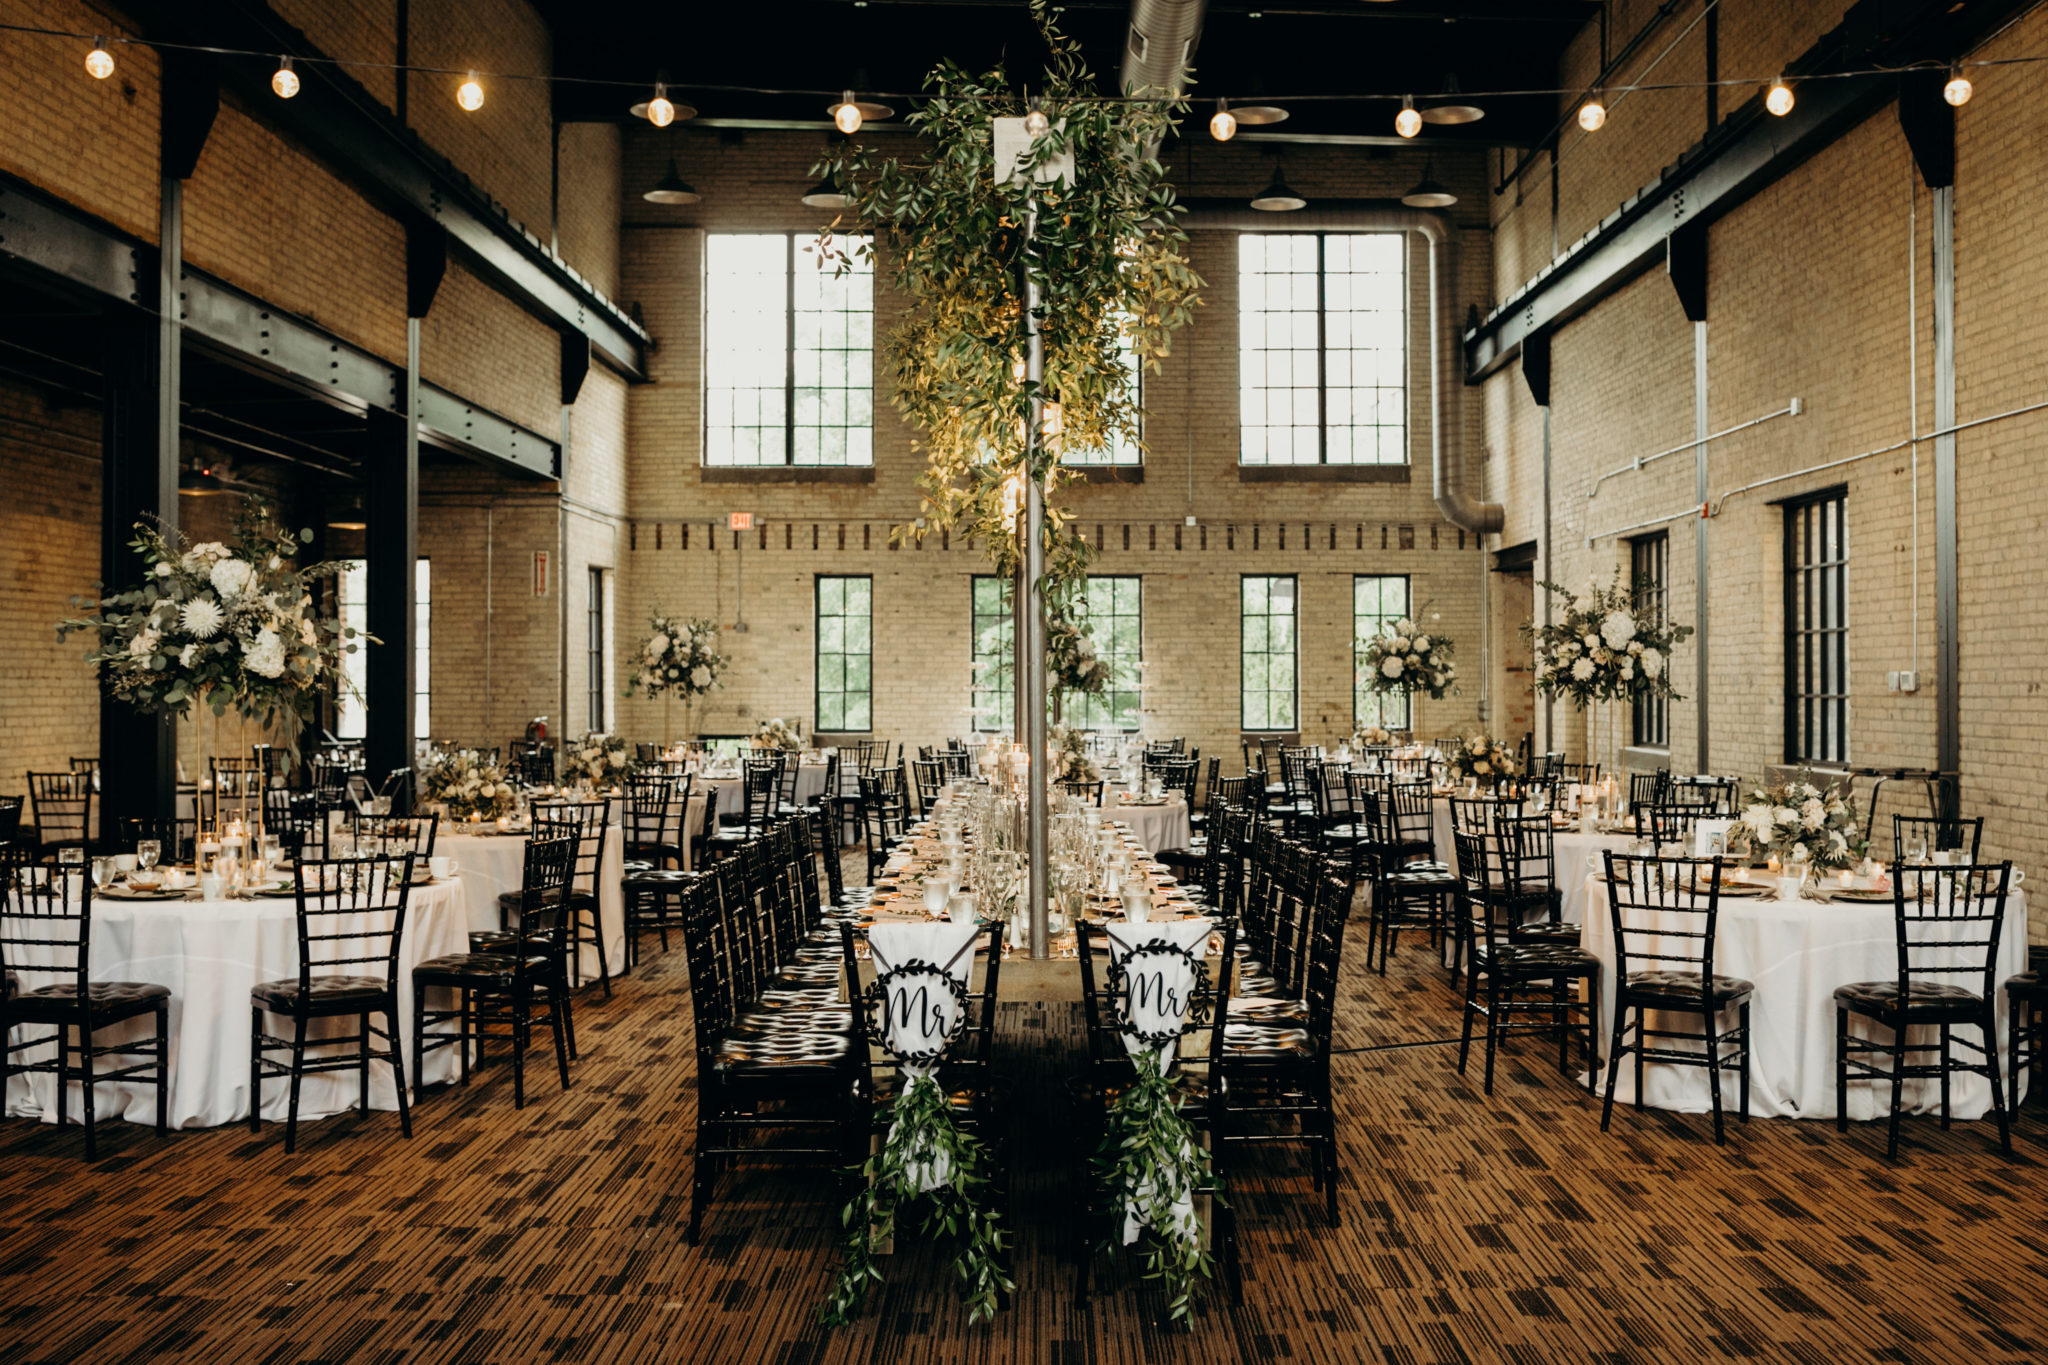 Top Wedding Venues Near Grand Rapids Mi of all time The ultimate guide 